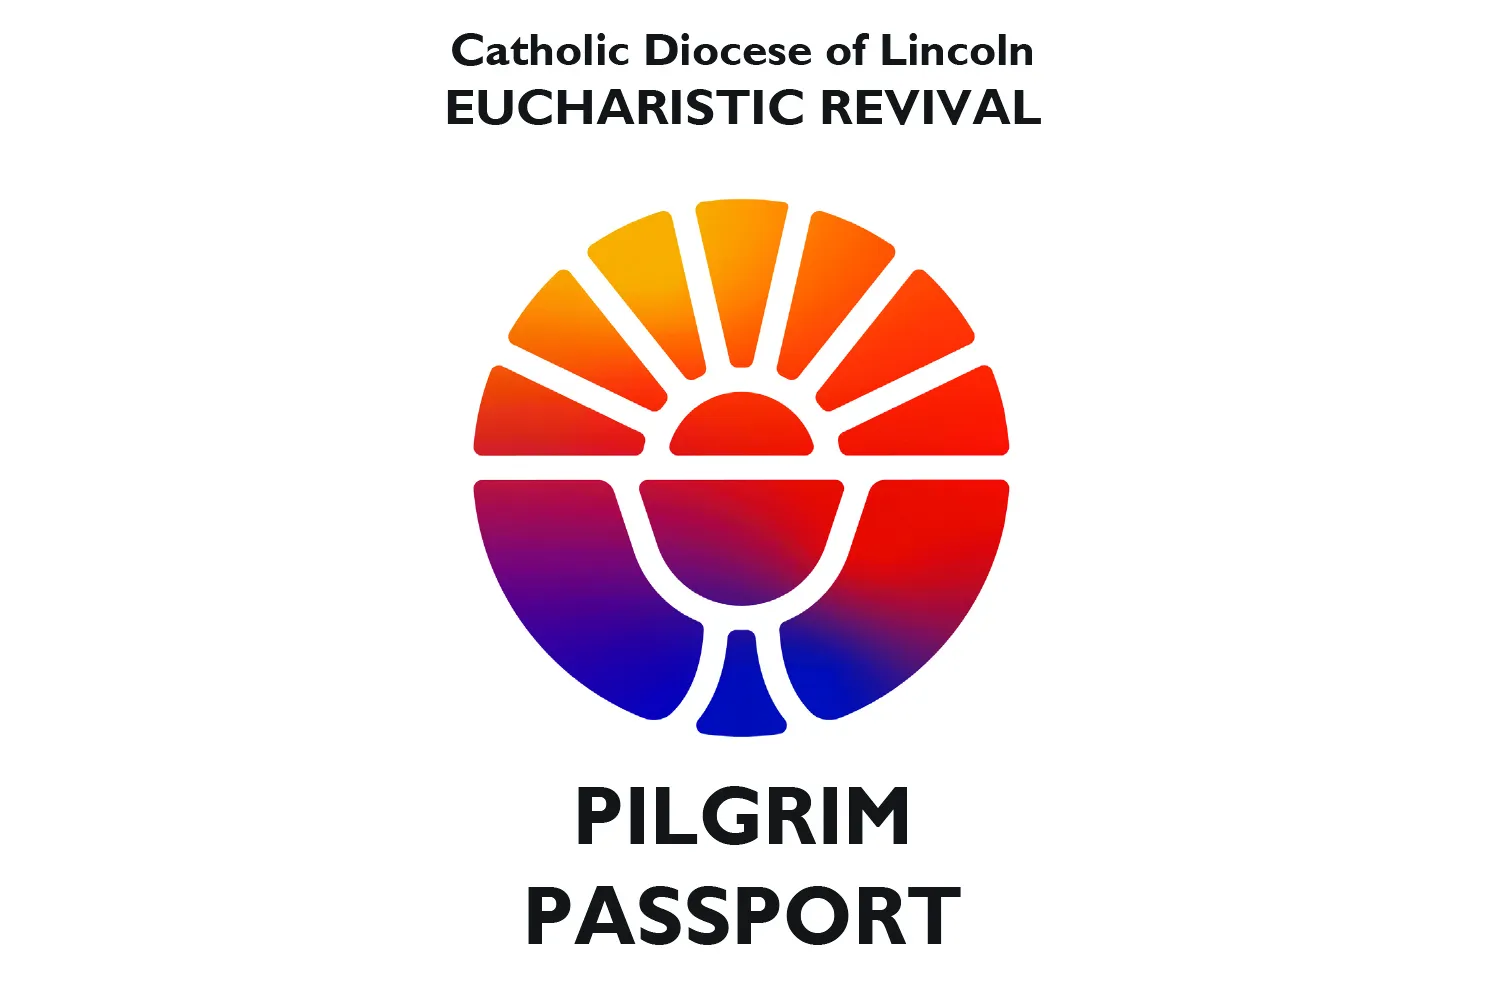 The cover of the Diocese of Lincoln's Eucharistic Pilgrimage Passport. Diocese of Lincoln